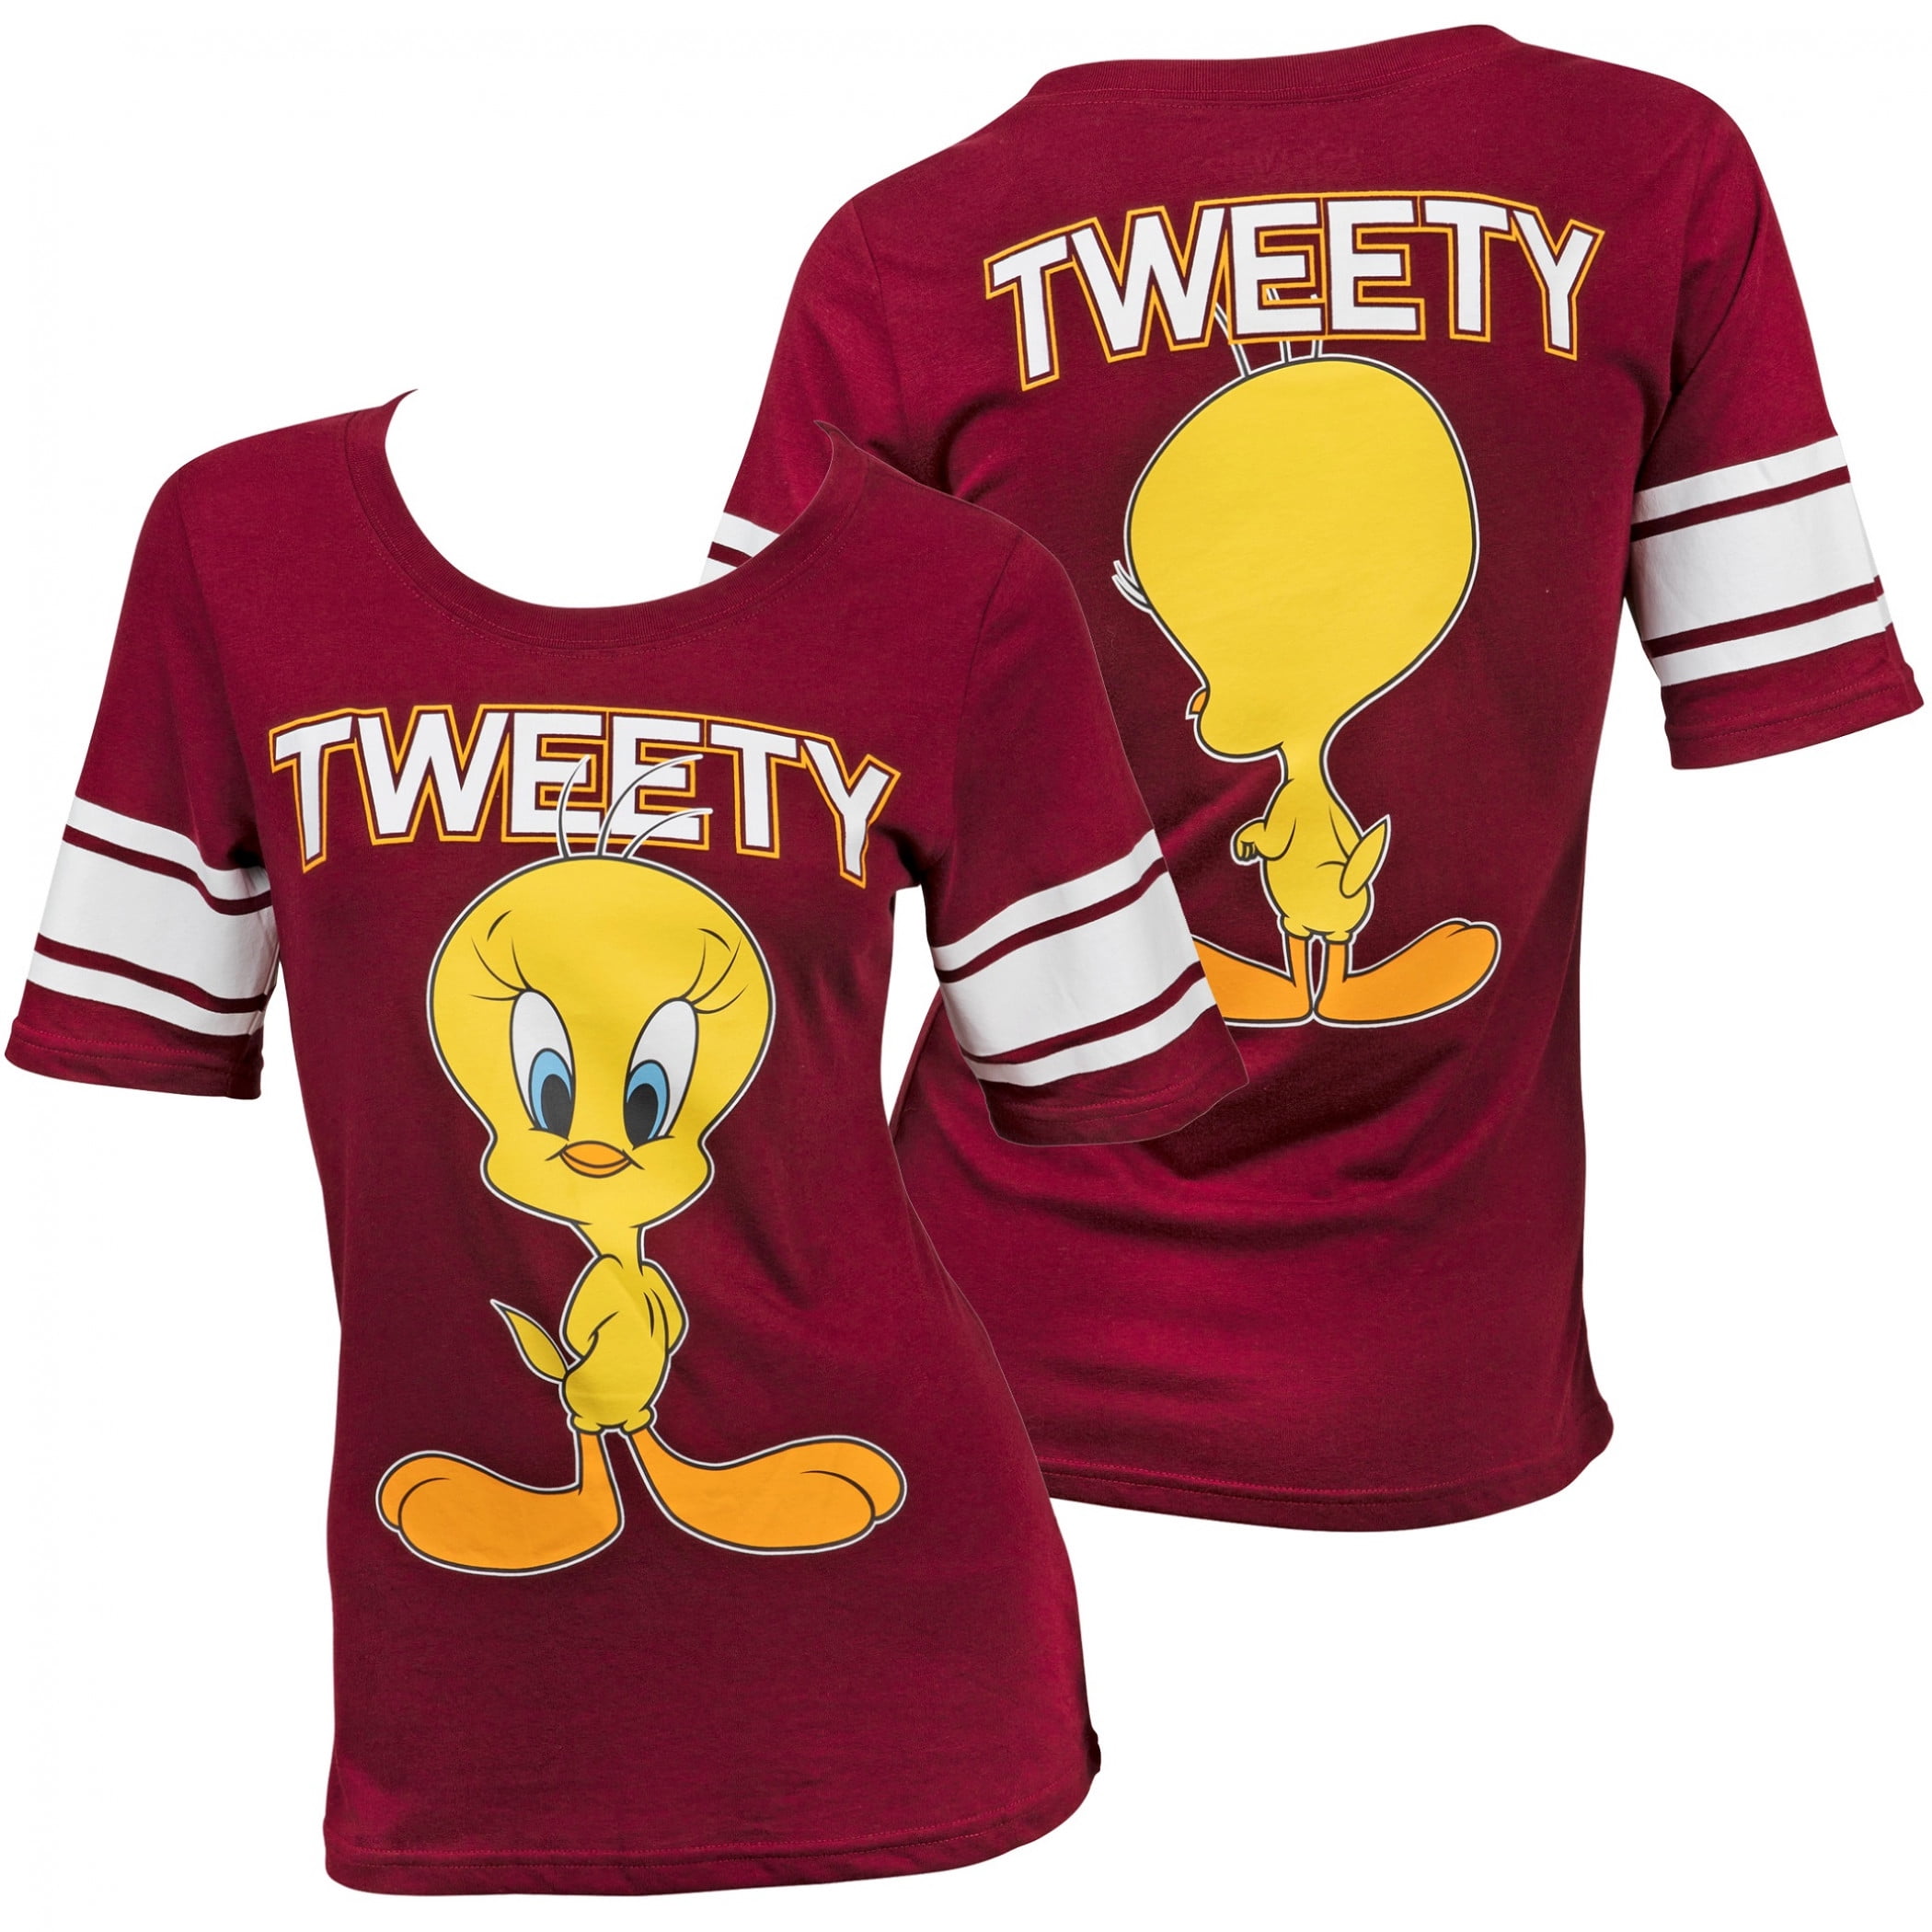 T-Shirt-Large Print Tweety Tunes and Bird Front Women's Back Looney